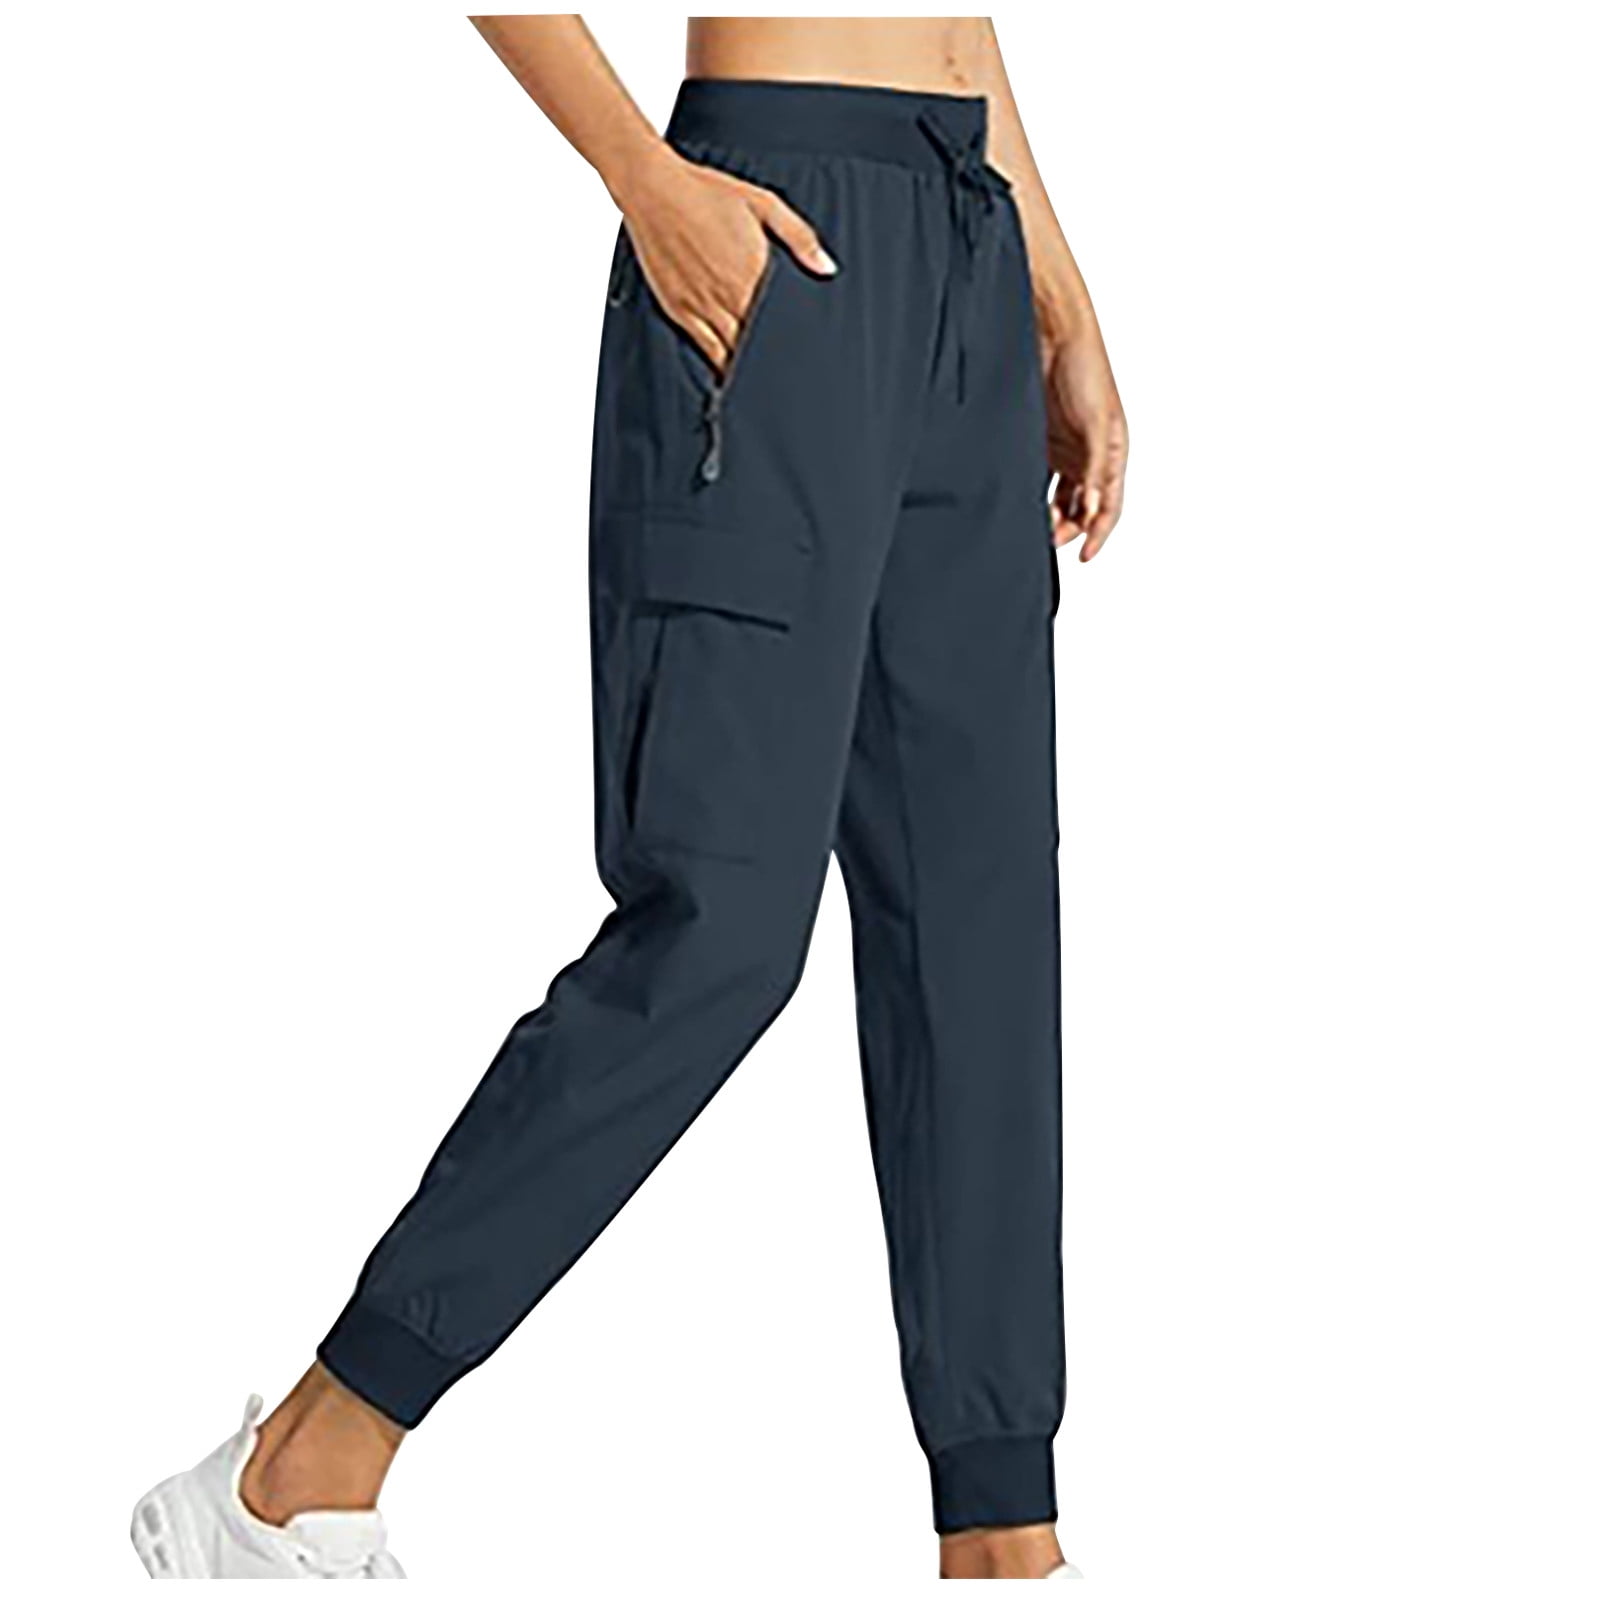 Womens Hiking Pants Joggers For Women Workout Athletic Golf Lightweight  Outdoor Gym Fitness Tapered Quick Dry Zipper Pockets Navy XL